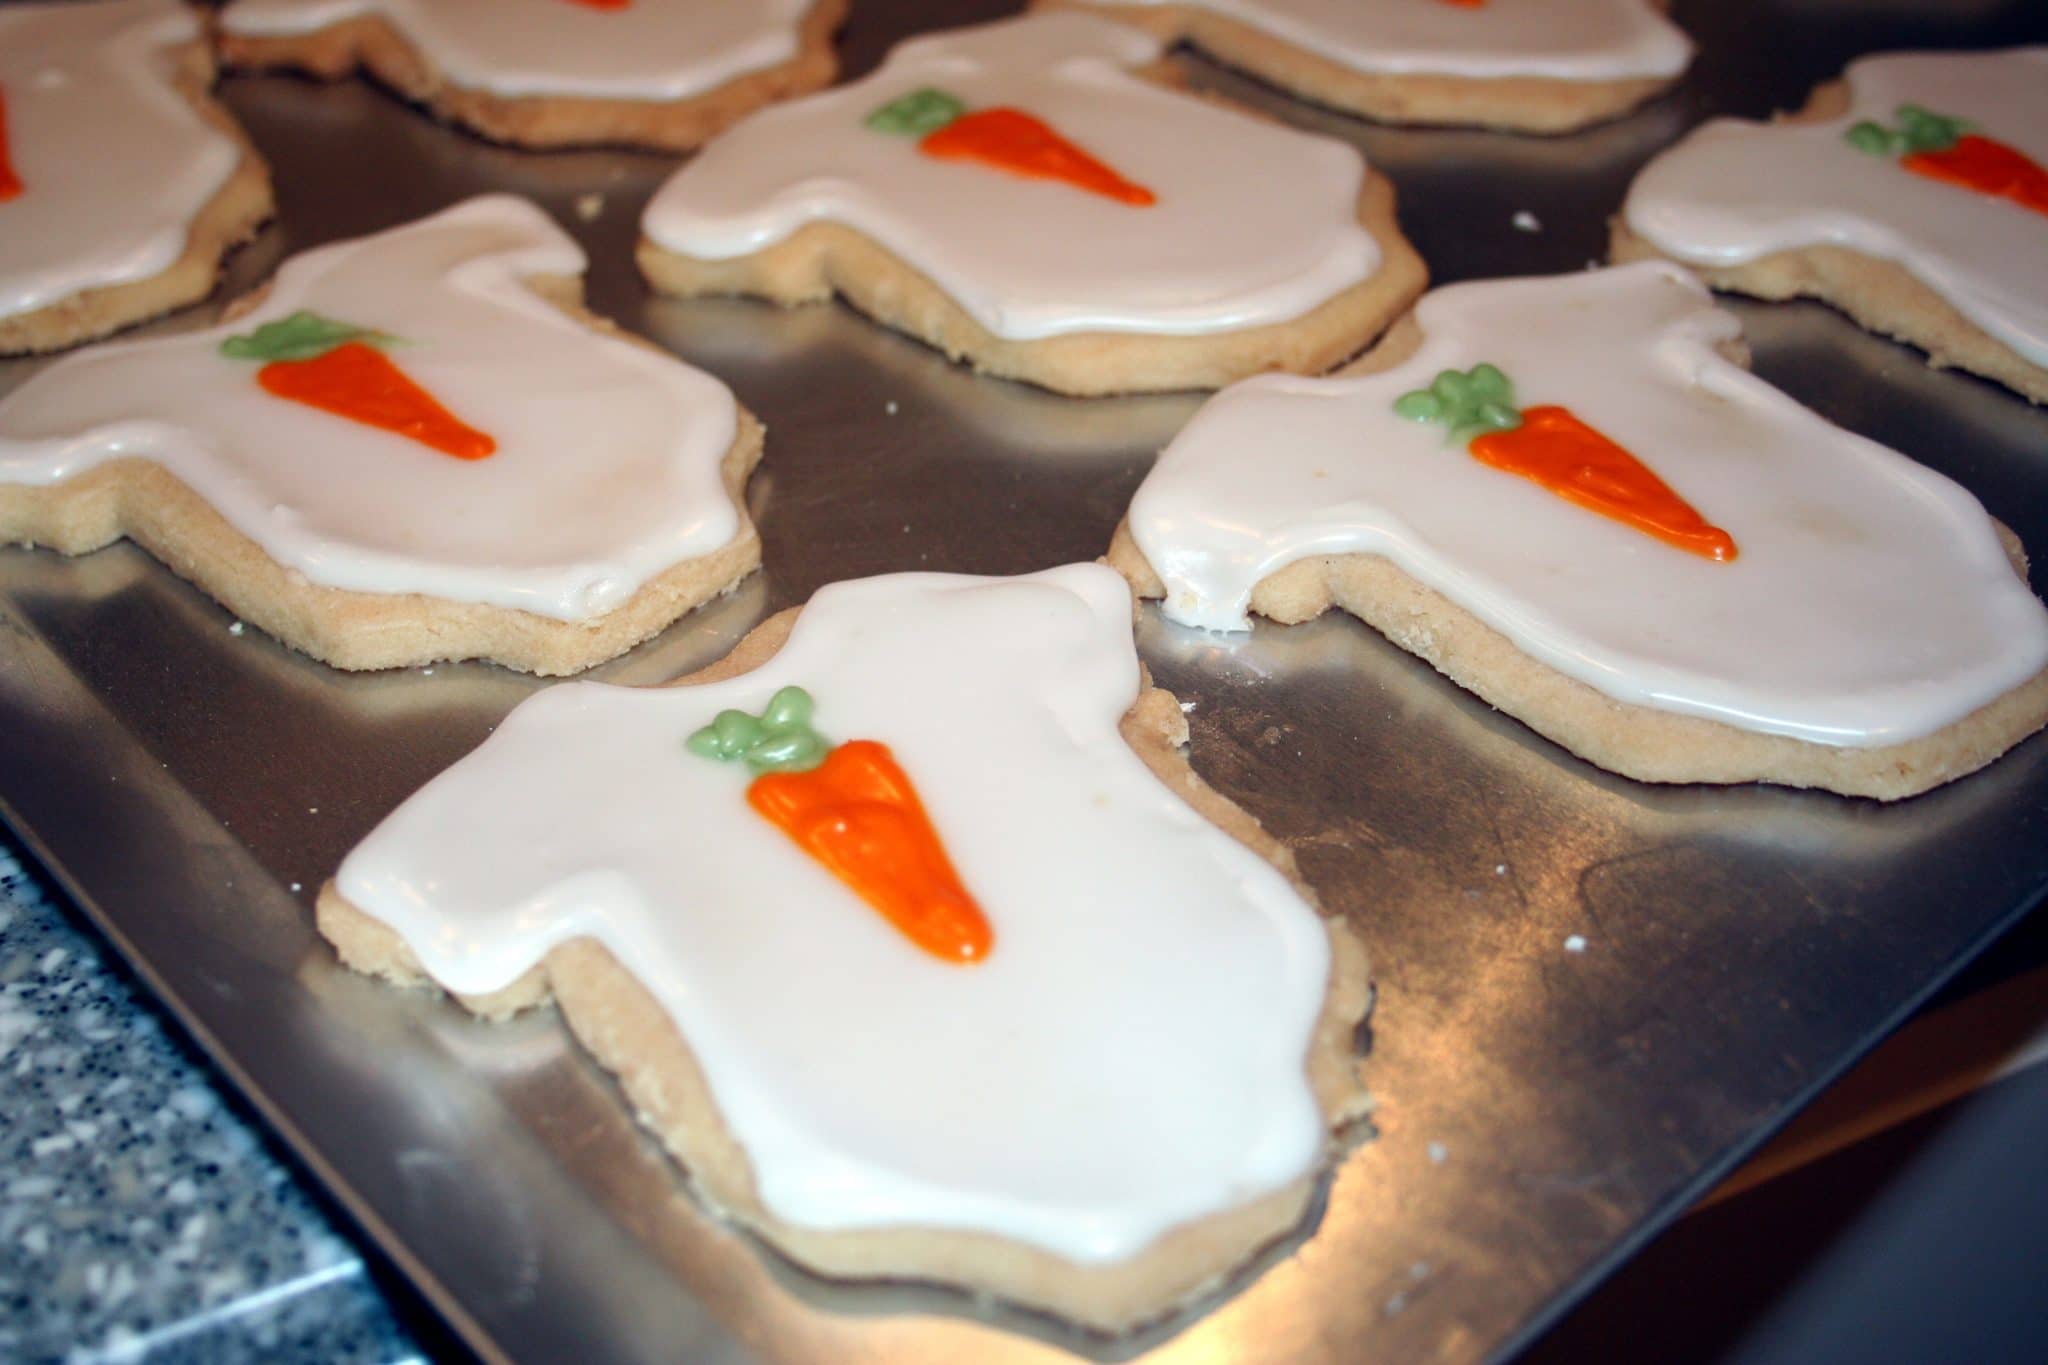 Cooling rack of onesie carrot cookies for baby shower